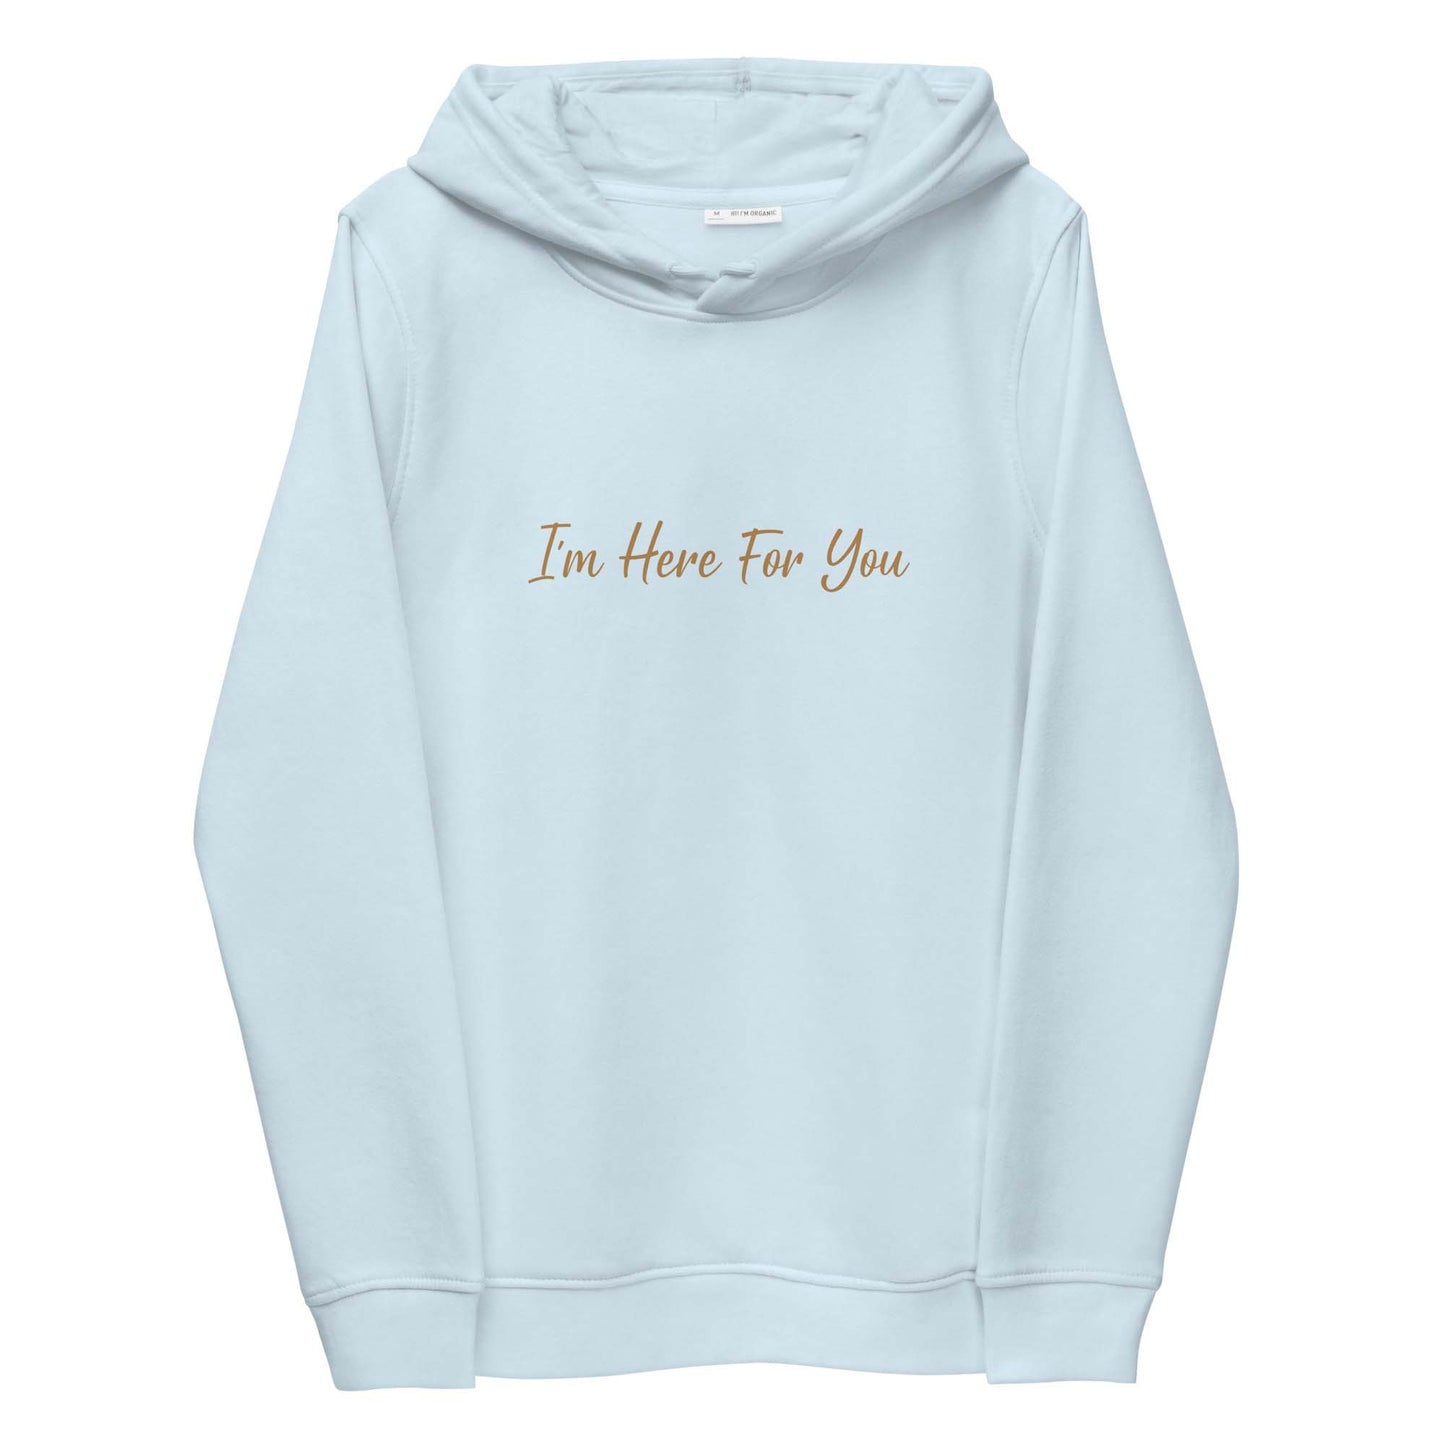 Women blue sustainable hoodie with inspirational quote, "I'm Here For You."